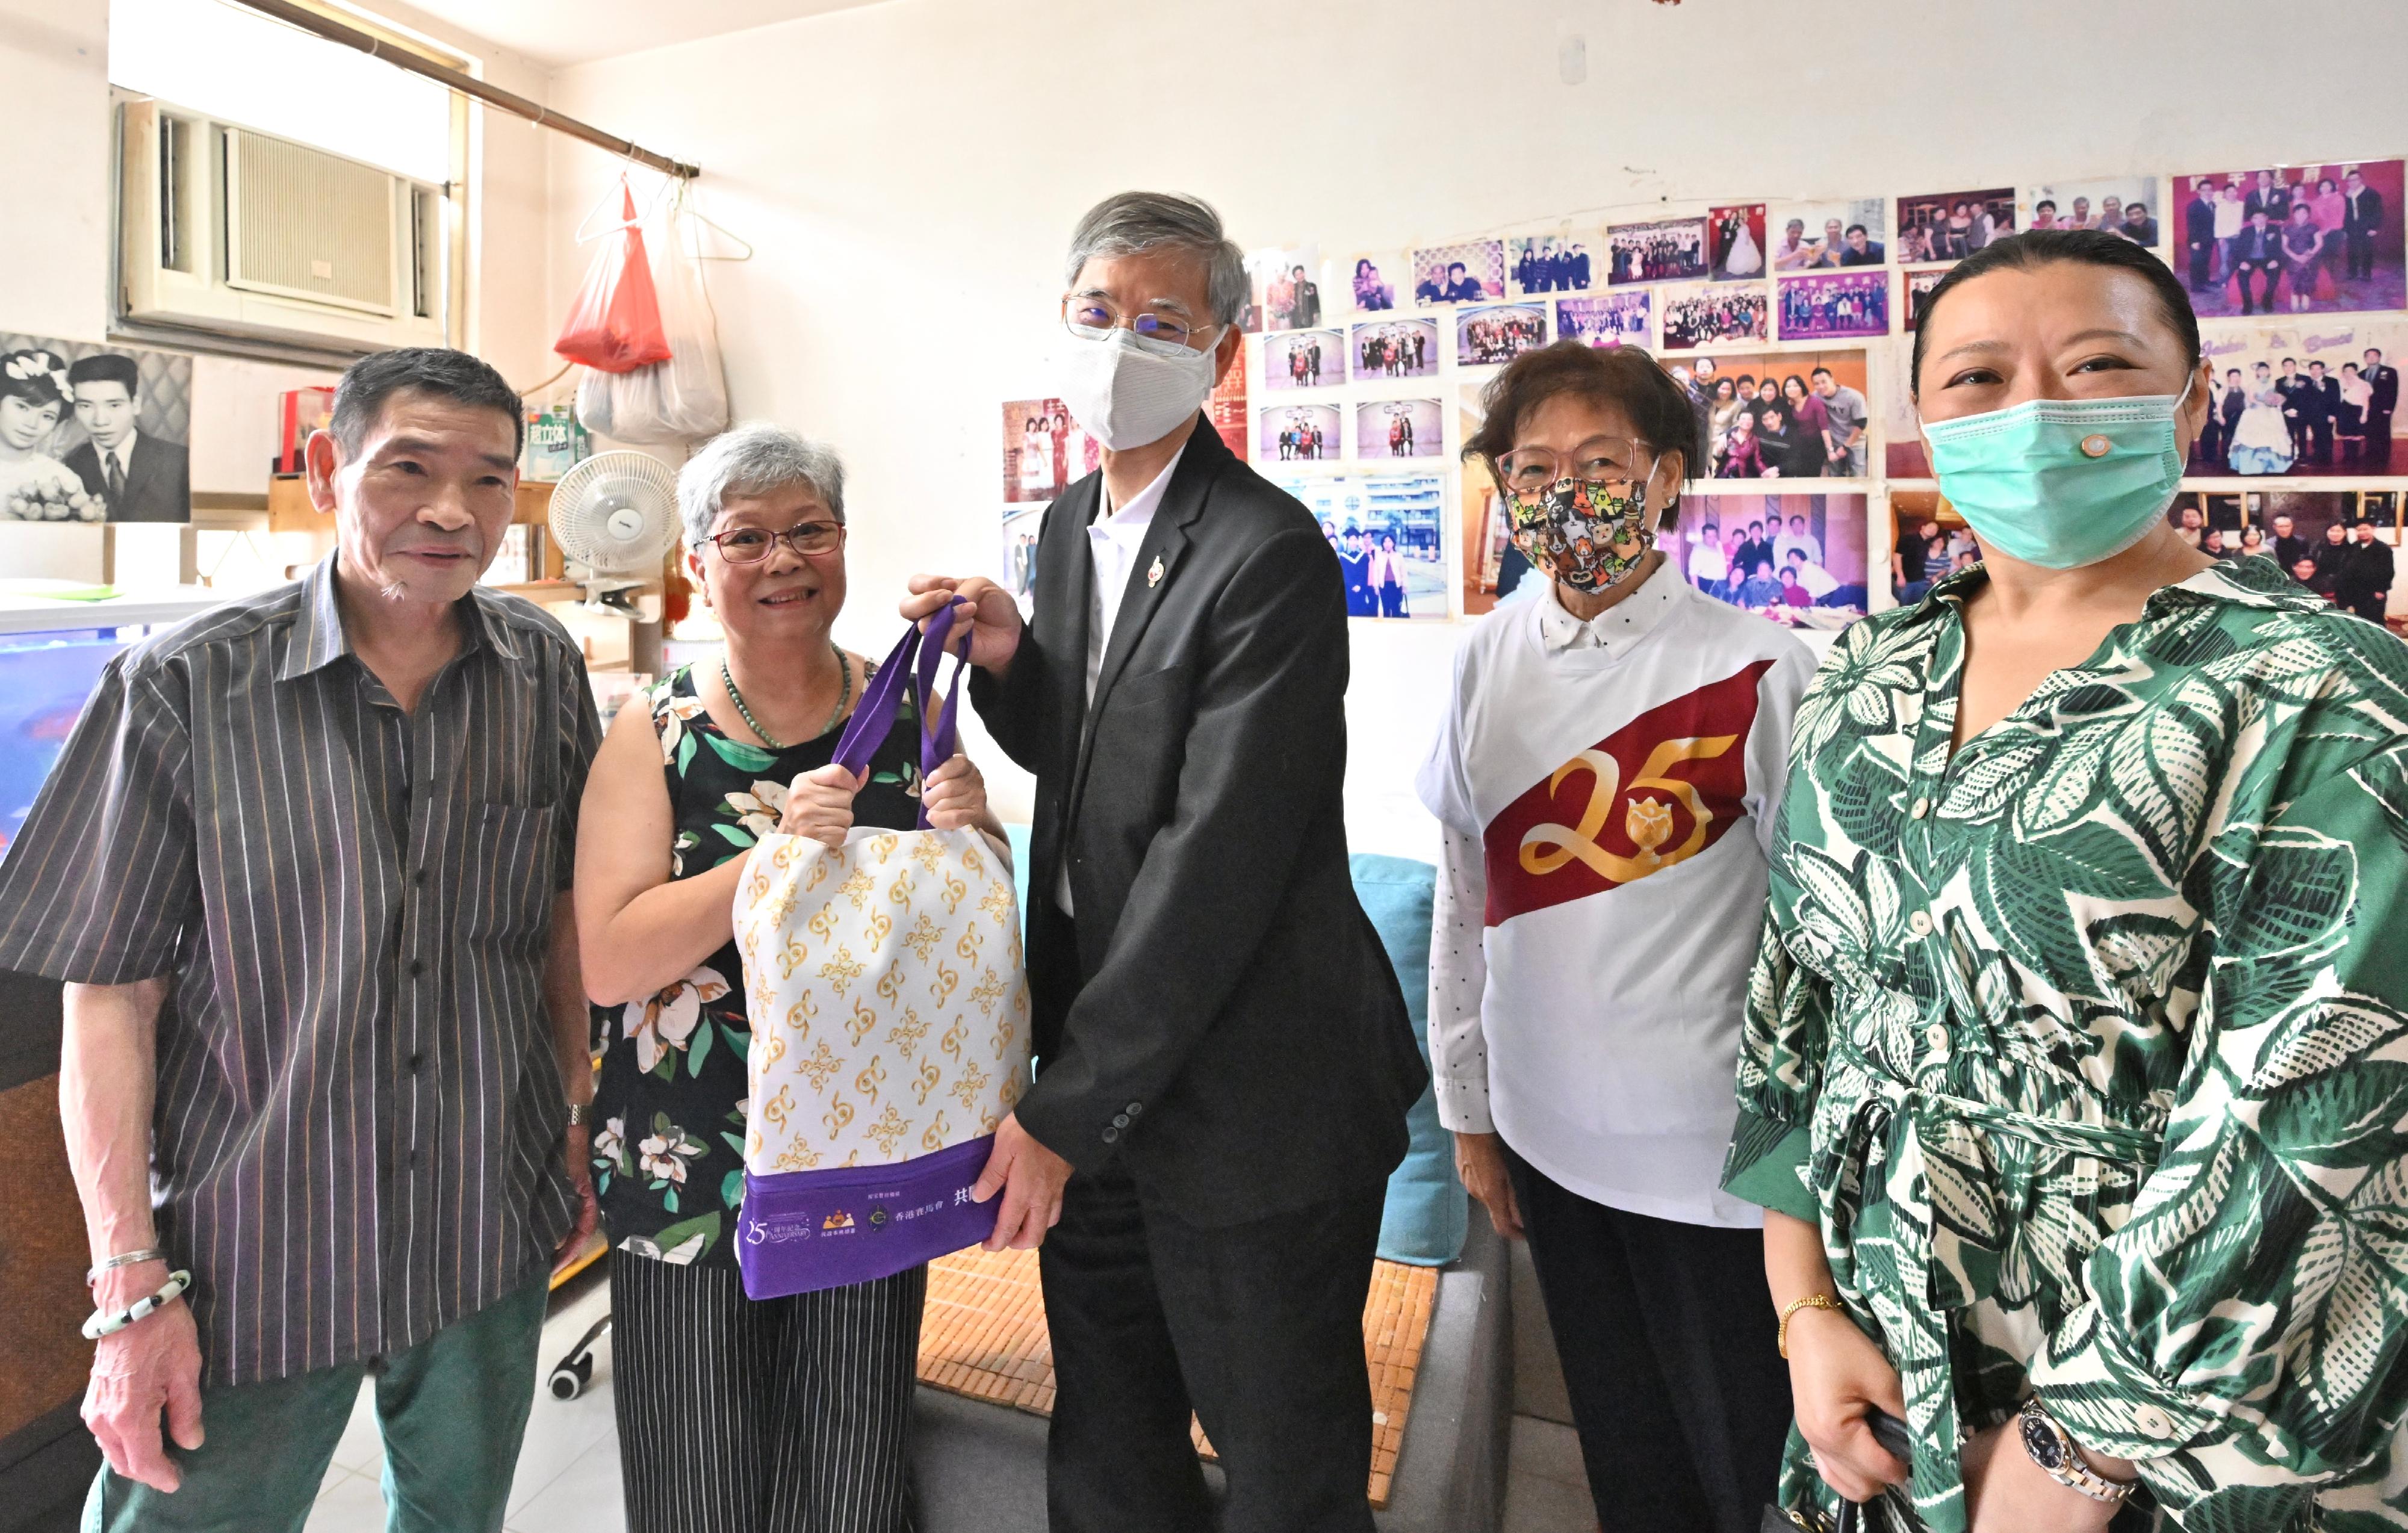 The Secretary for Labour and Welfare, Dr Law Chi-kwong, today (June 20) visited Wan Chai District and Islands District, and distributed gift packs under the Celebrations for All project in celebration of the 25th anniversary of the establishment of the Hong Kong Special Administrative Region, extending warm regards to the disadvantaged and the underprivileged. Photo shows (from third left) Dr Law; the Chairman of the OIWA, Ms Chau Chuen-heung; and the District Officer (Islands), Miss Amy Yeung, in a visit to elderly doubletons in Tung Chung, encouraging them to make good use of anti-epidemic supplies for personal protection during festive celebrations.